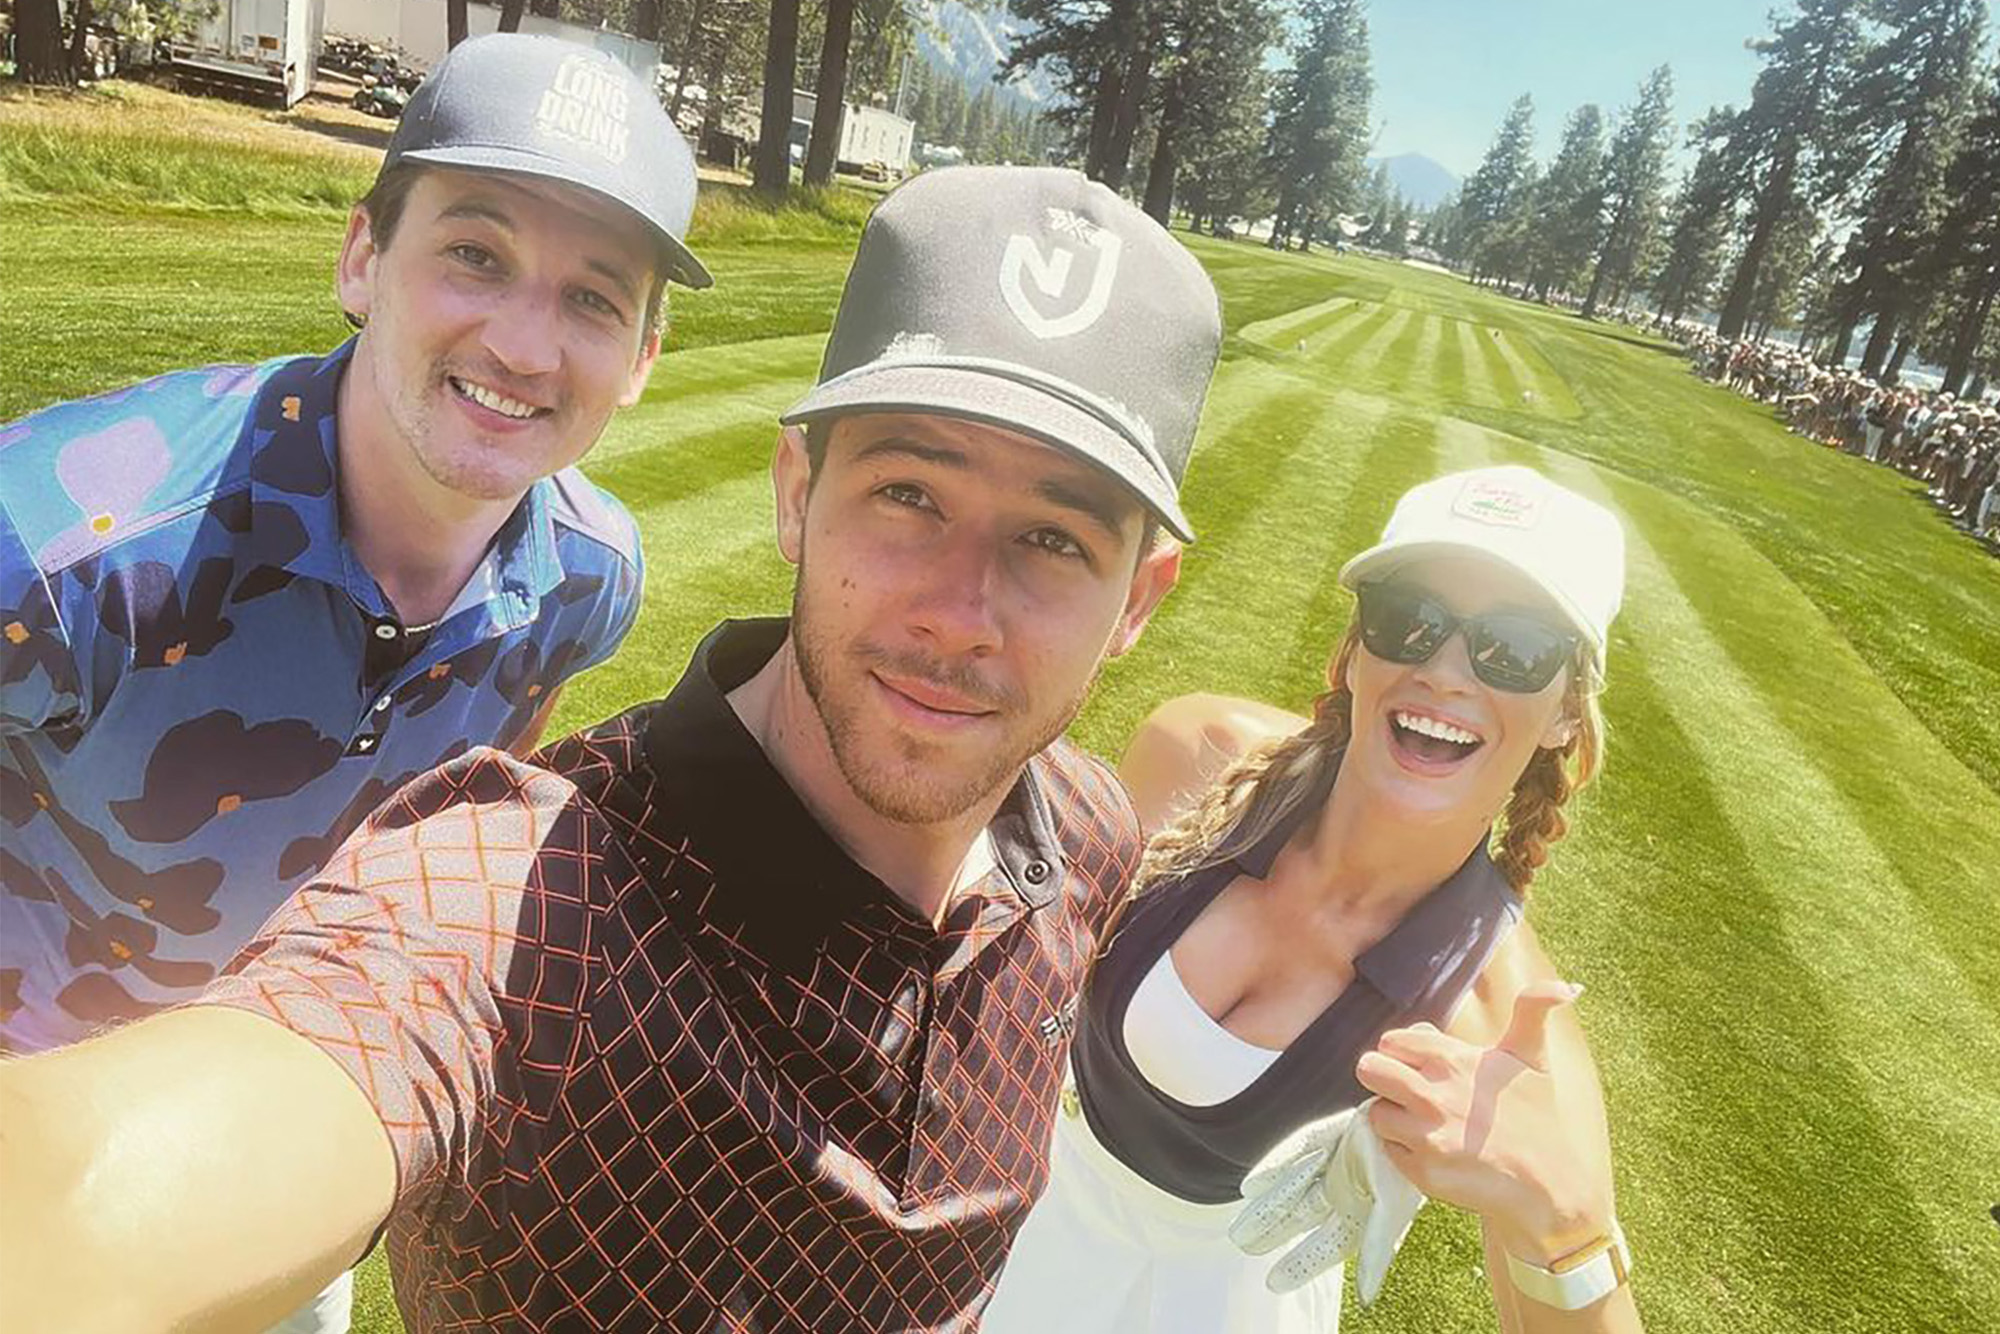 HAPPY GILMORES: It's just another day on the golf course for Paige Spiranac, but Miles Teller (left) and Nick Jonas make sure to crash the par-tee in style.